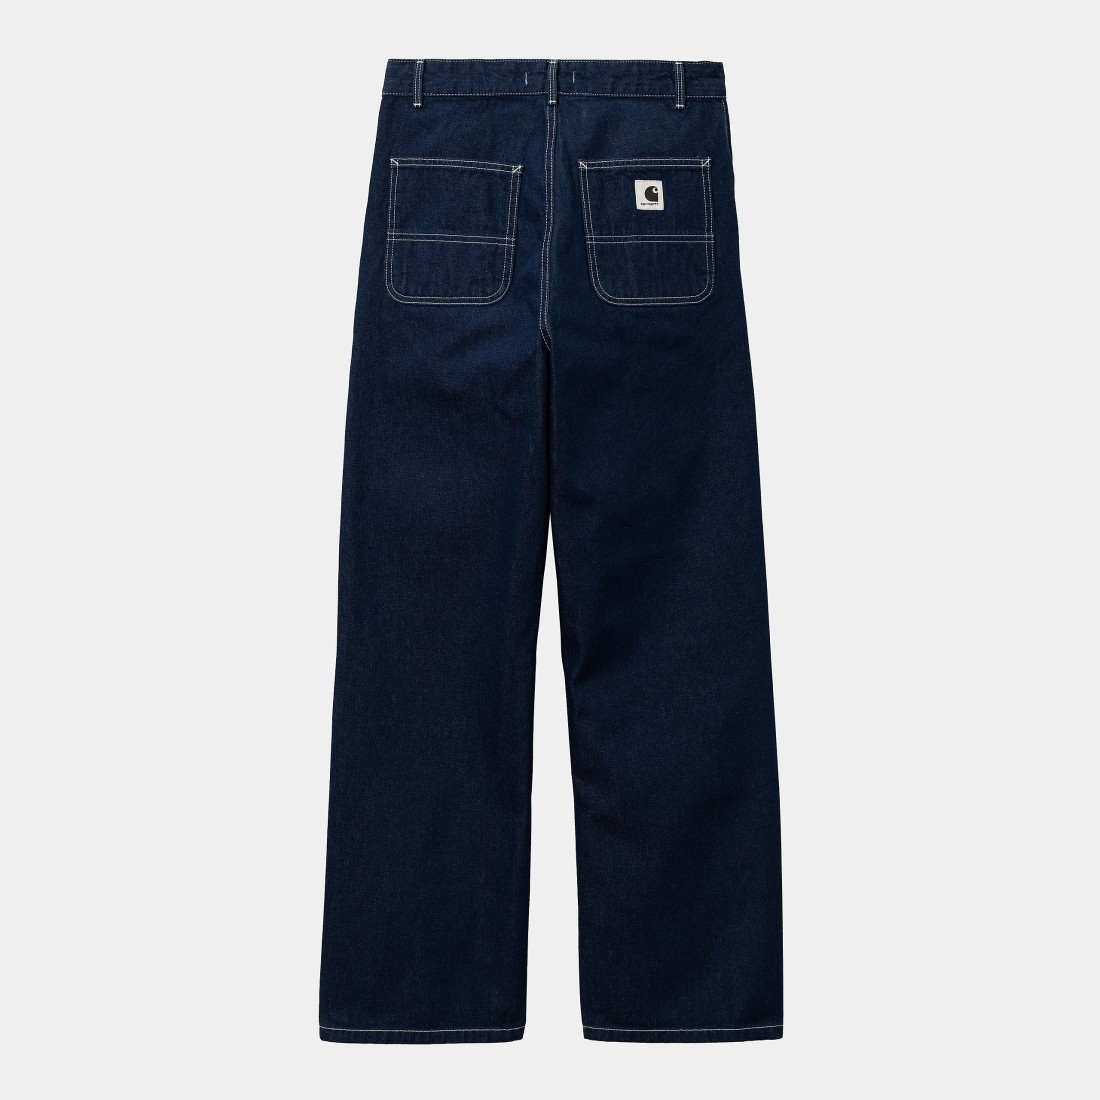 W' Simple Pant Blue One Washed Carhartt WIP